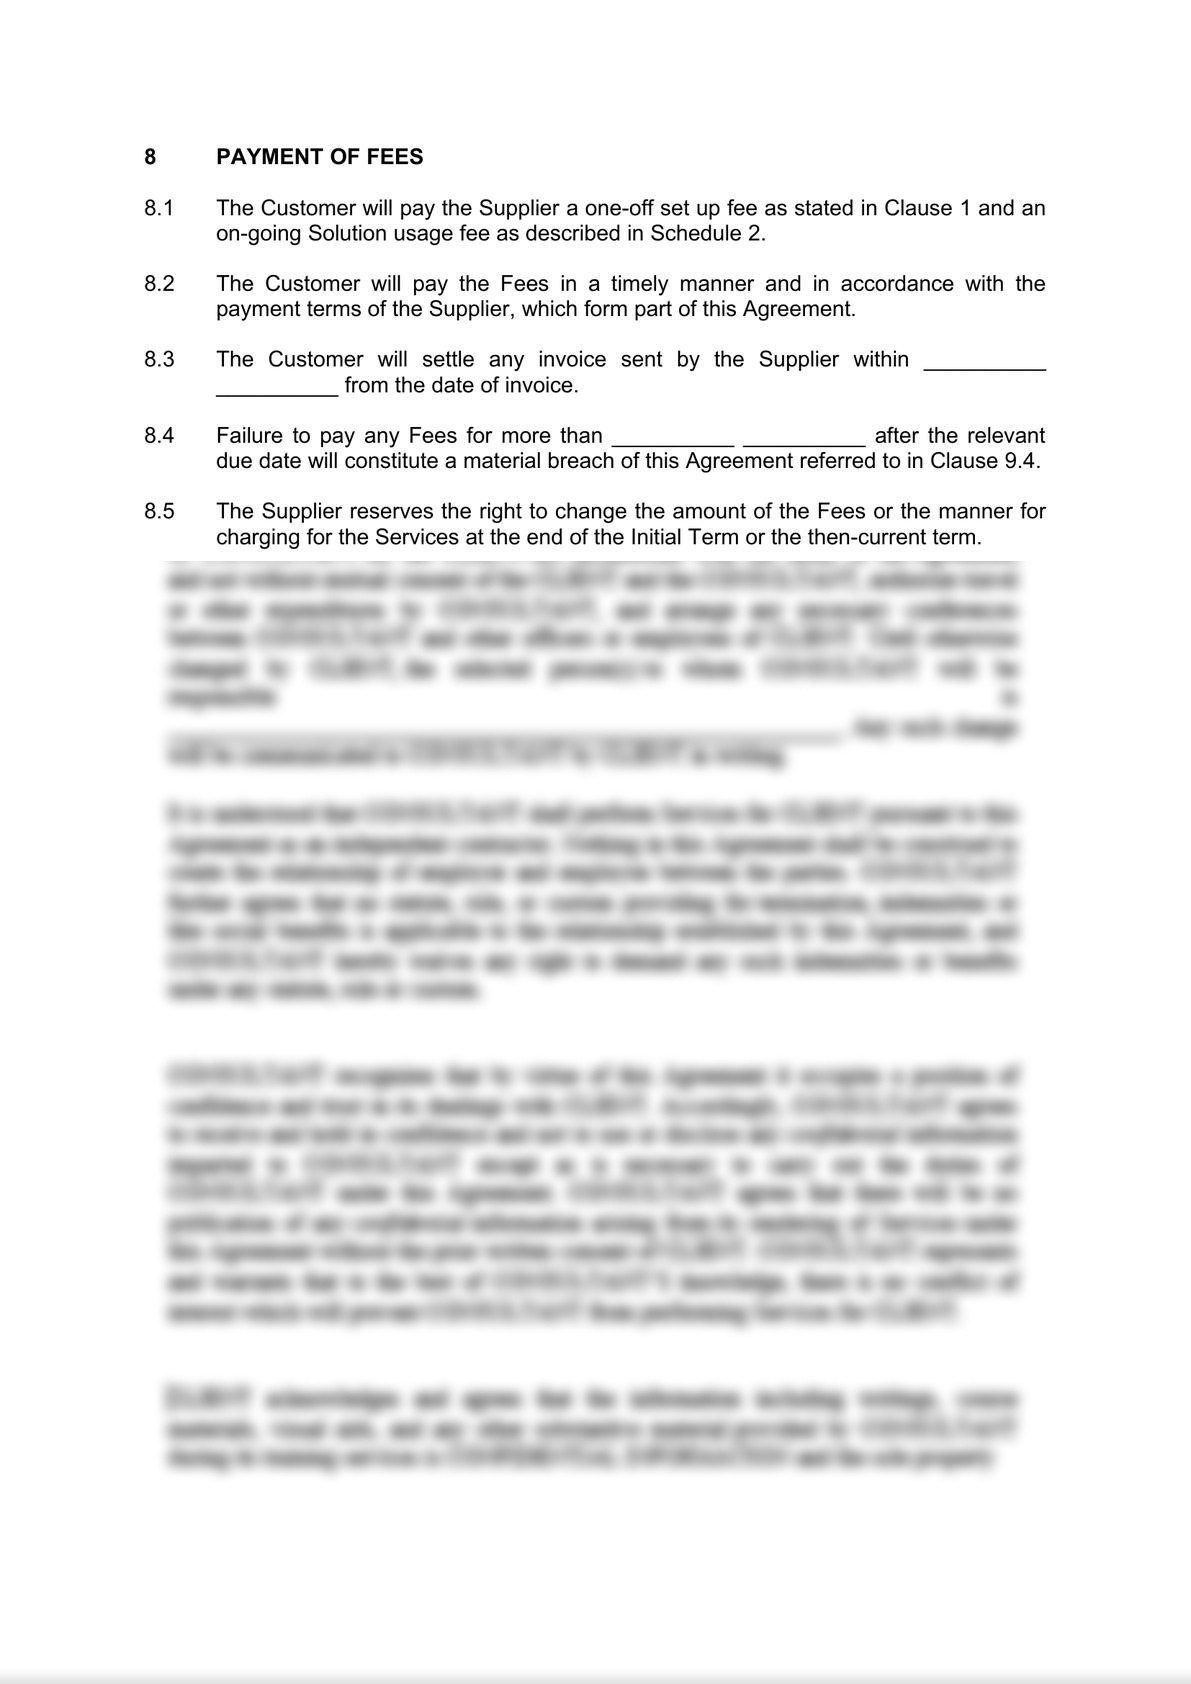 White Label Solution Agreement-6